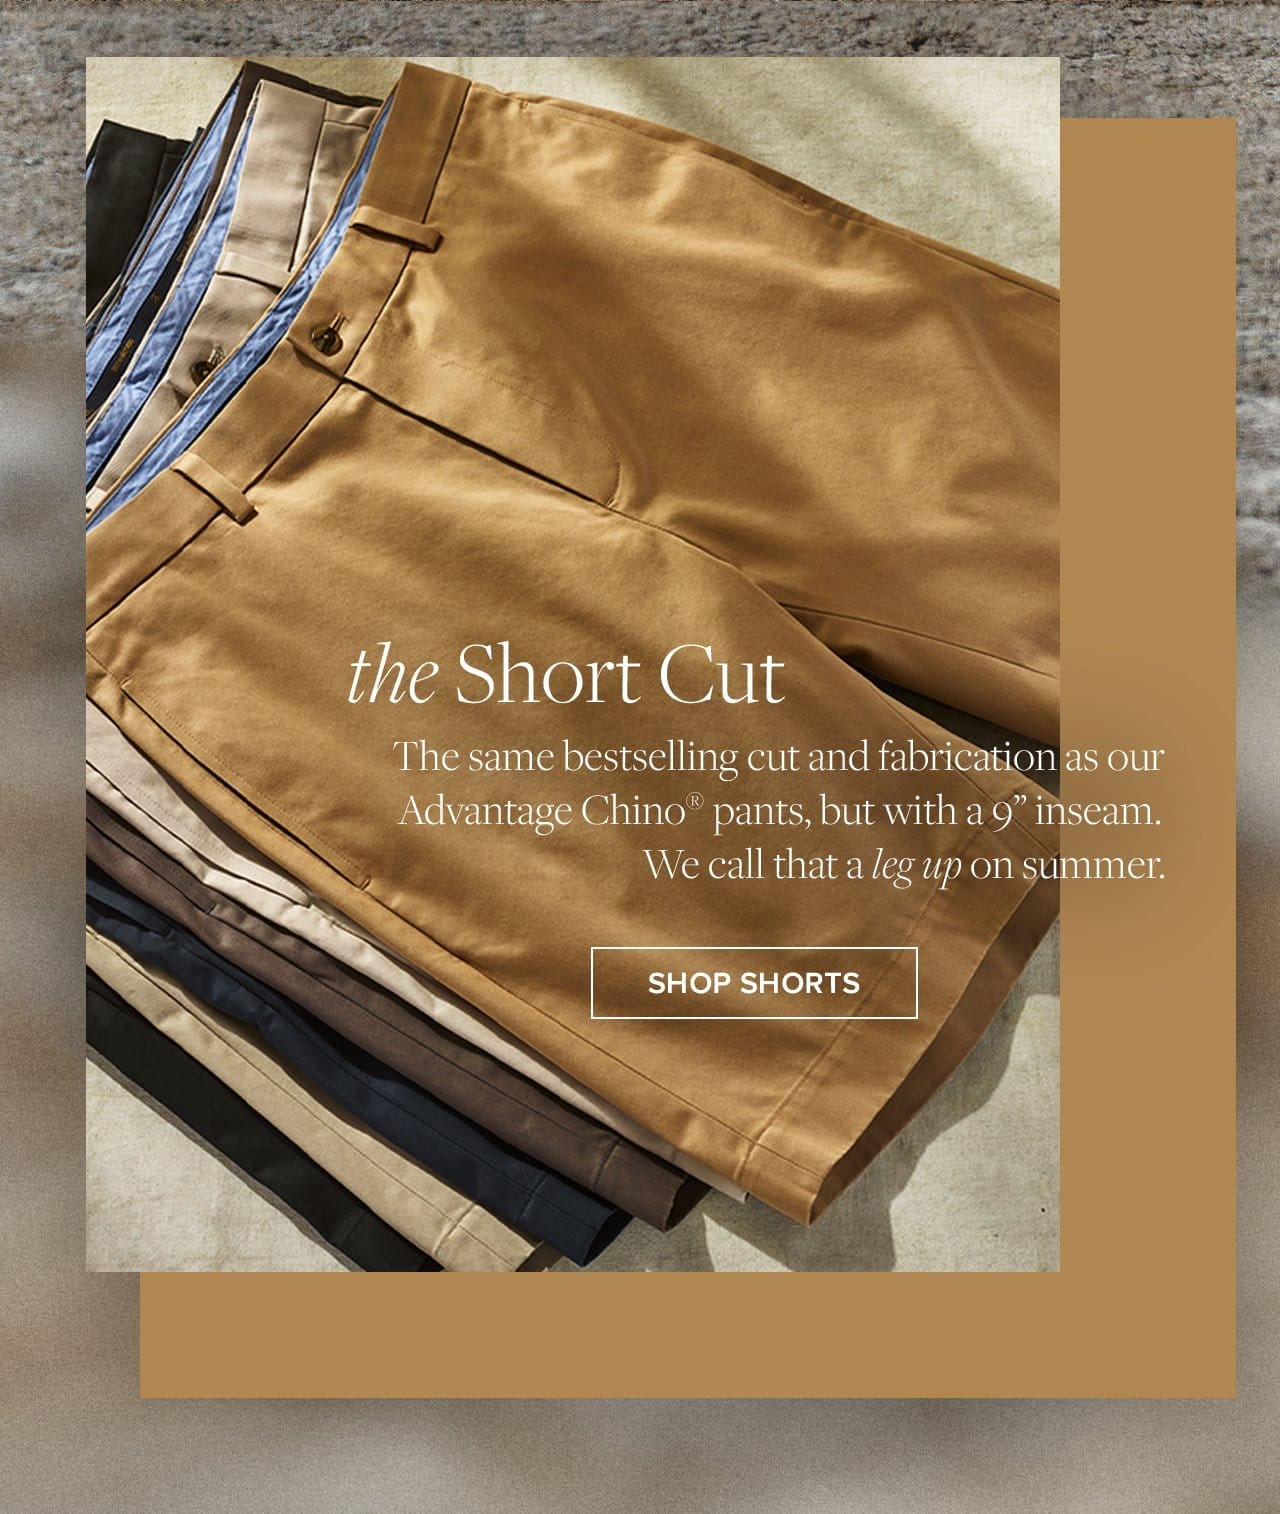 the Short Cut The Same bestselling cut and fabrication as our Advantage Chino pants, but with a 9 inseam. We call that a leg up on summer. Shop Shorts